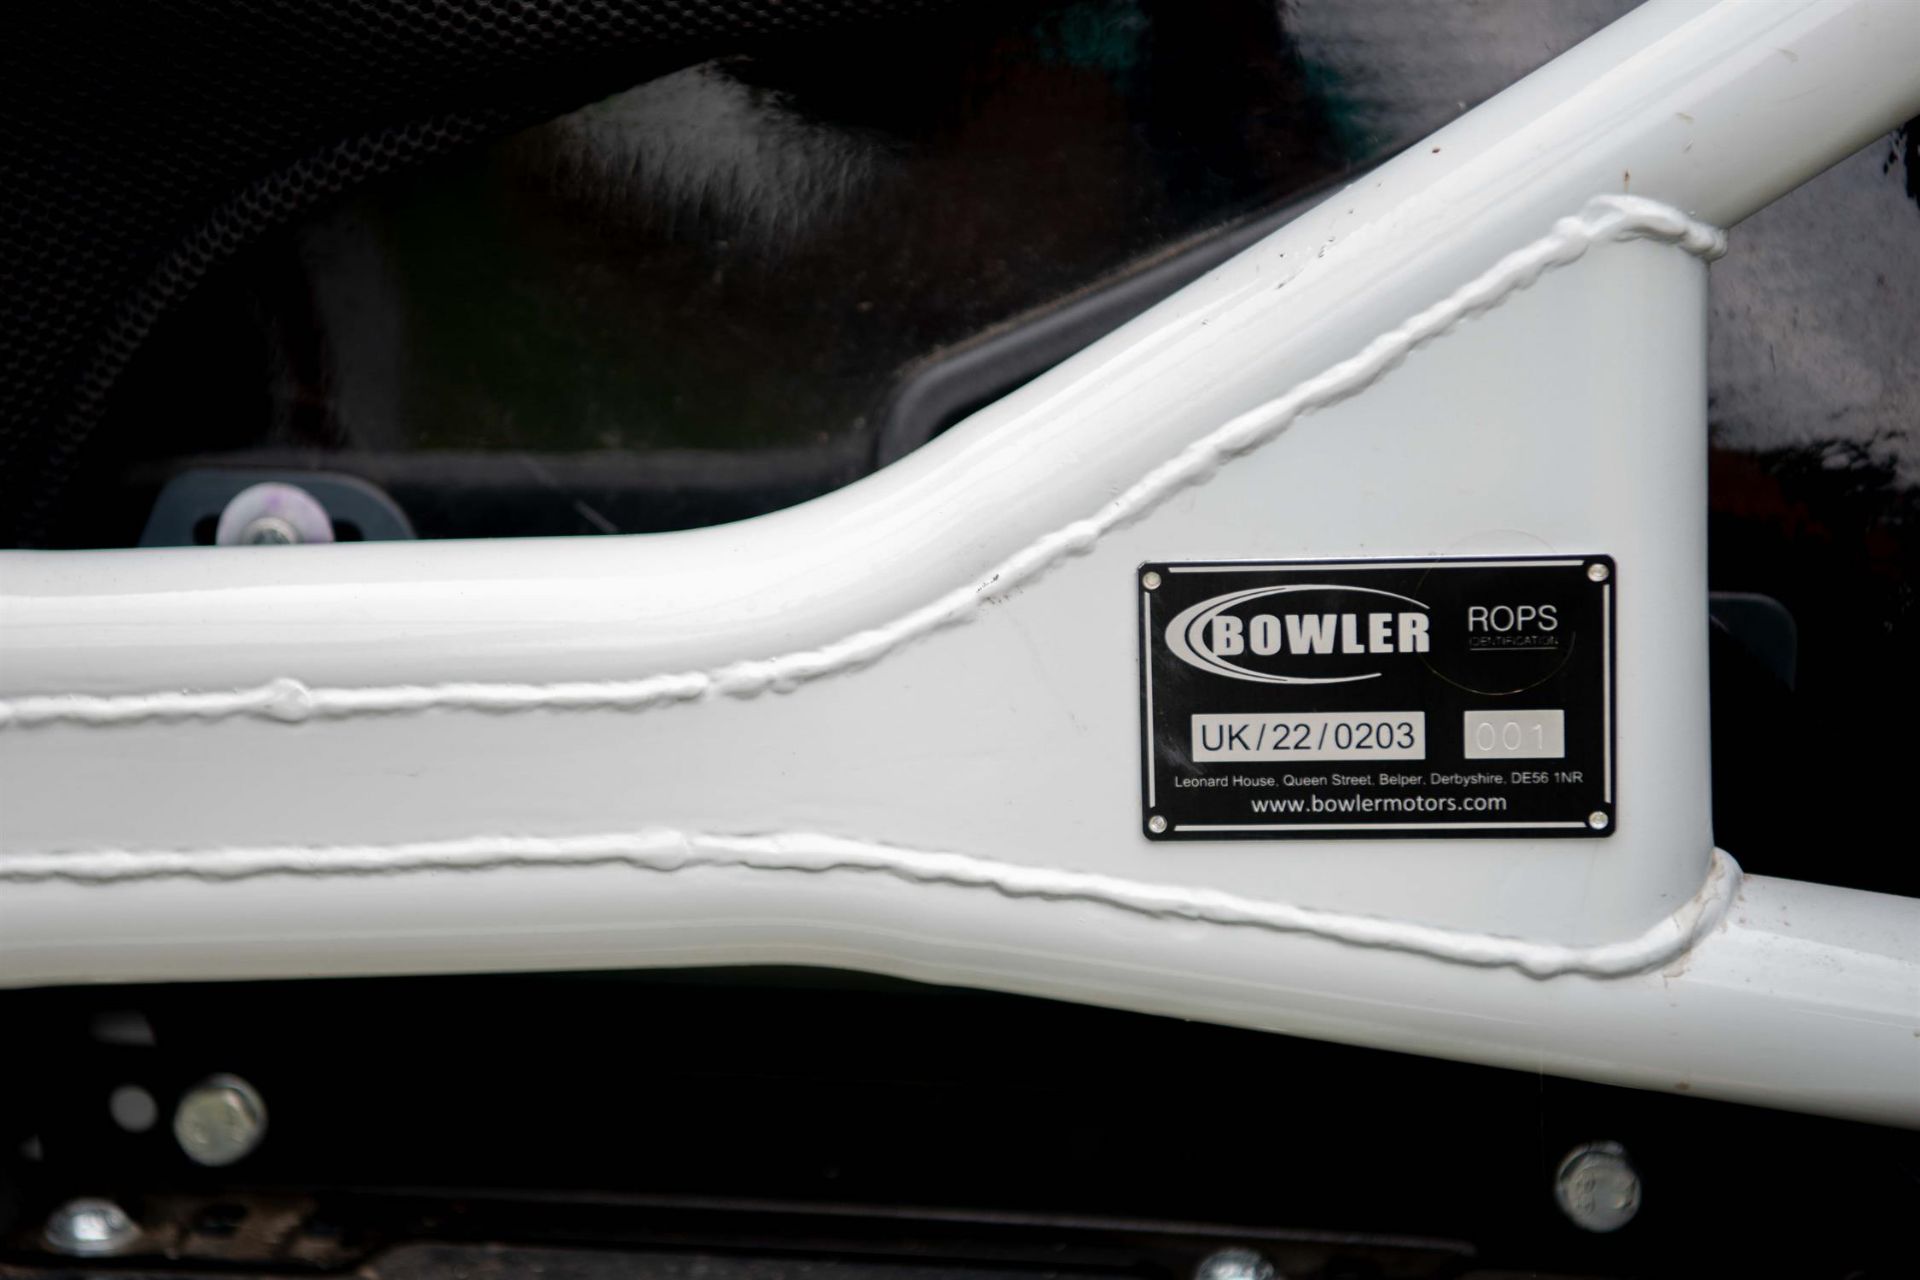 2021 Land Rover Defender by Bowler #001 - Image 7 of 10